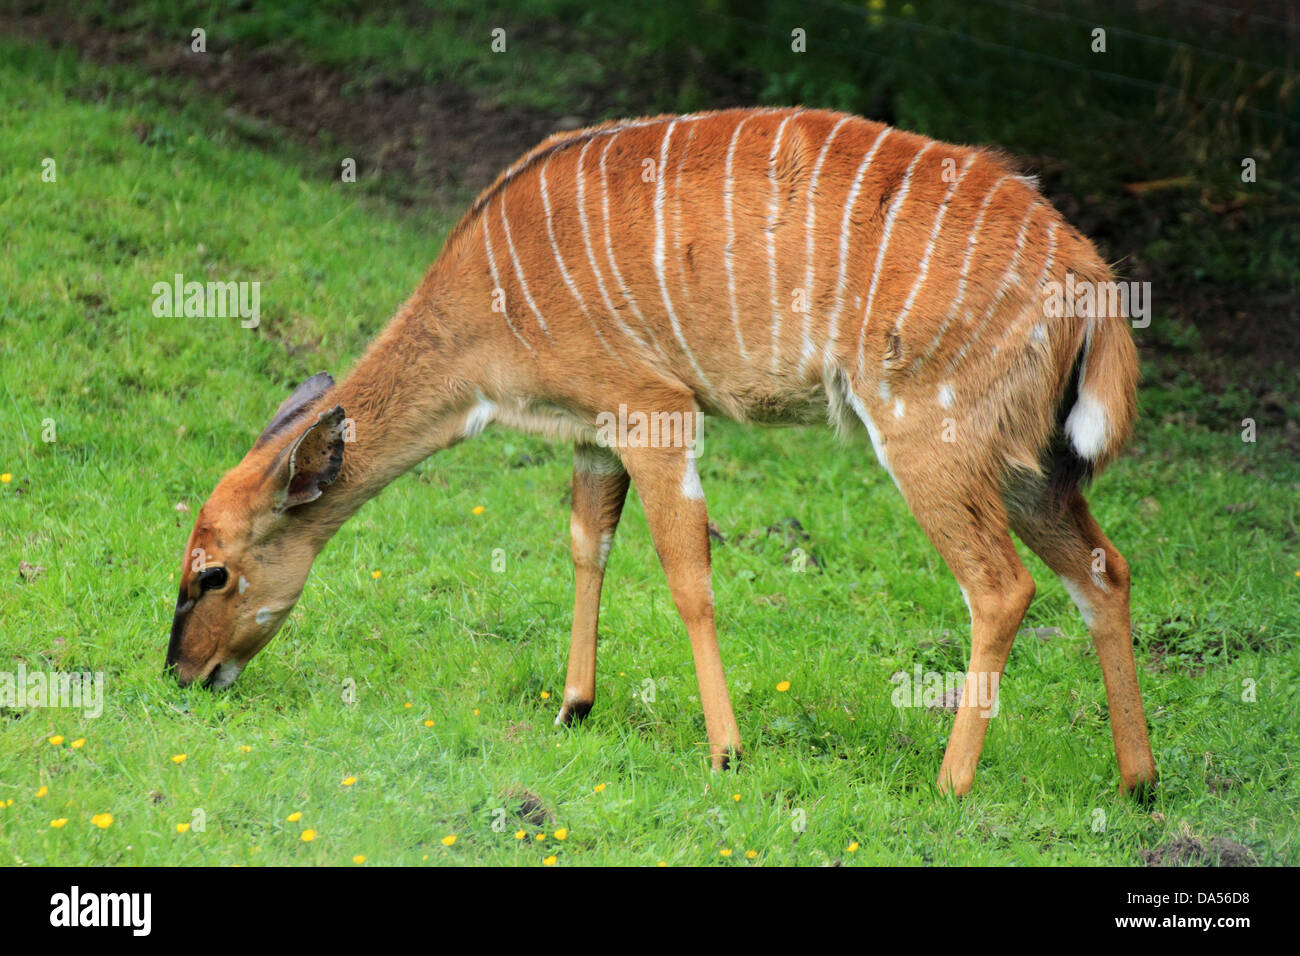 Nayla (Tragelaphus angasii) grazing in a field Stock Photo